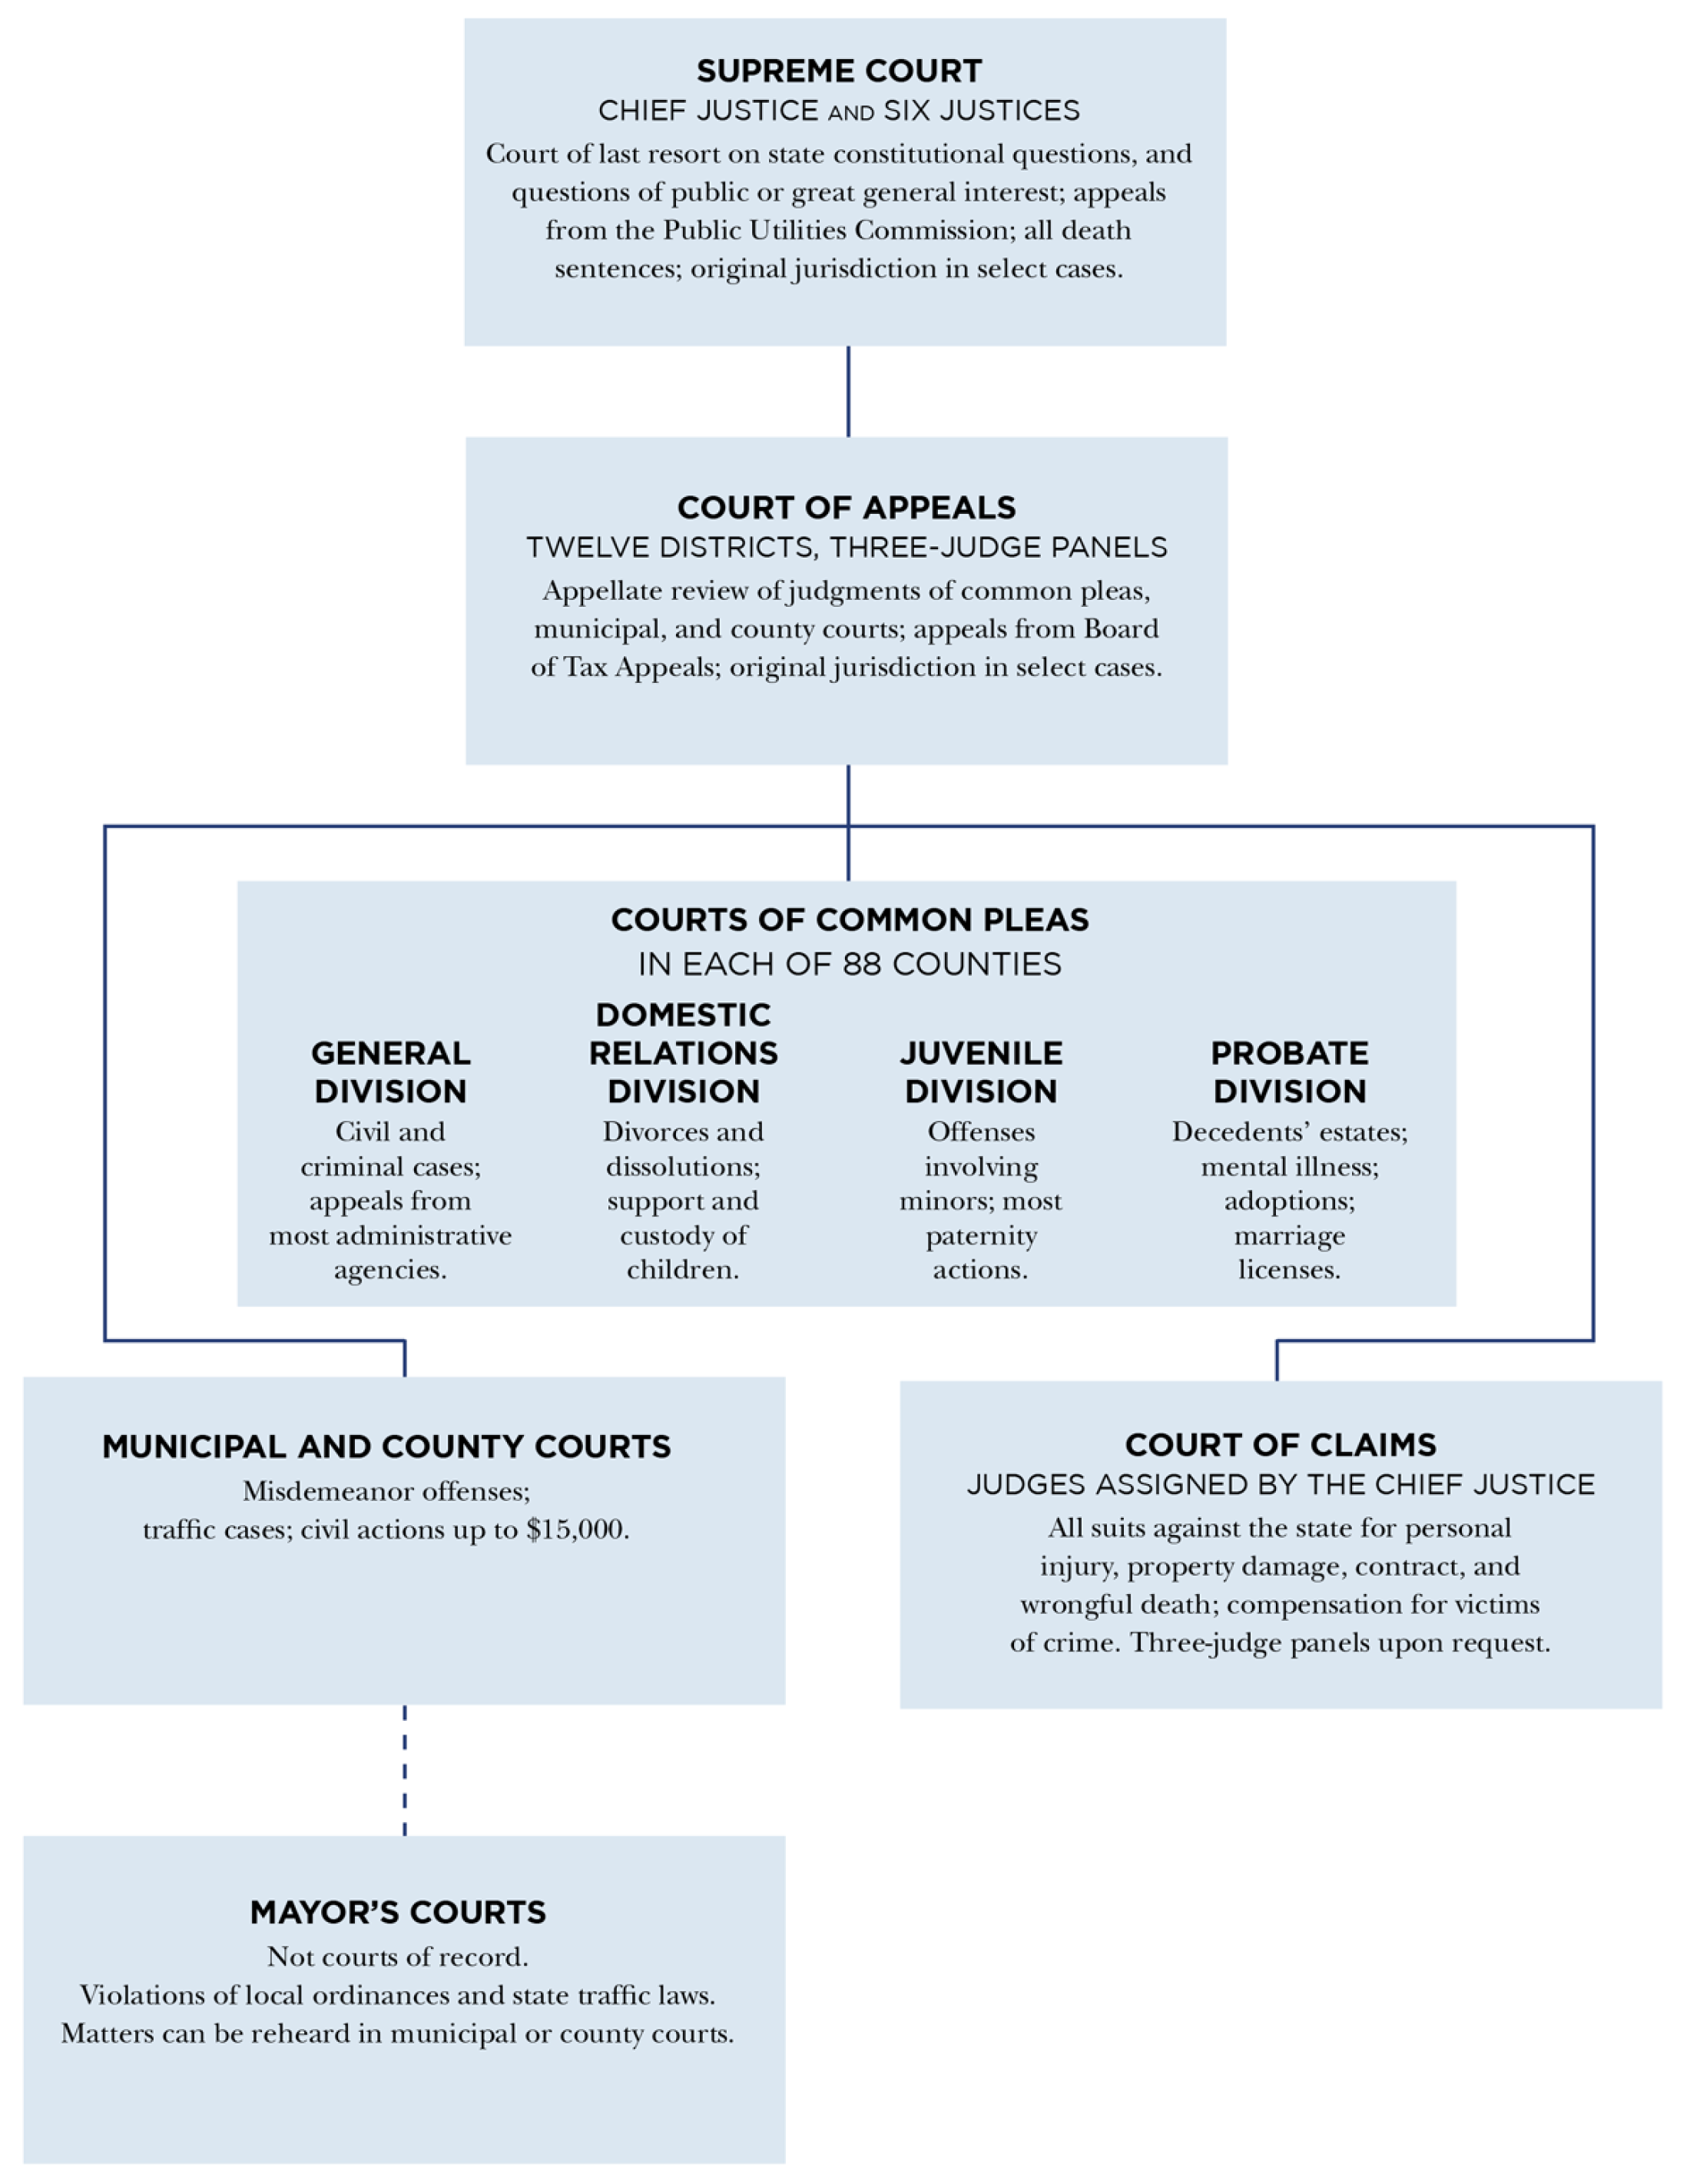 Image showing a flow chart of how the Ohio judiciary is structured.